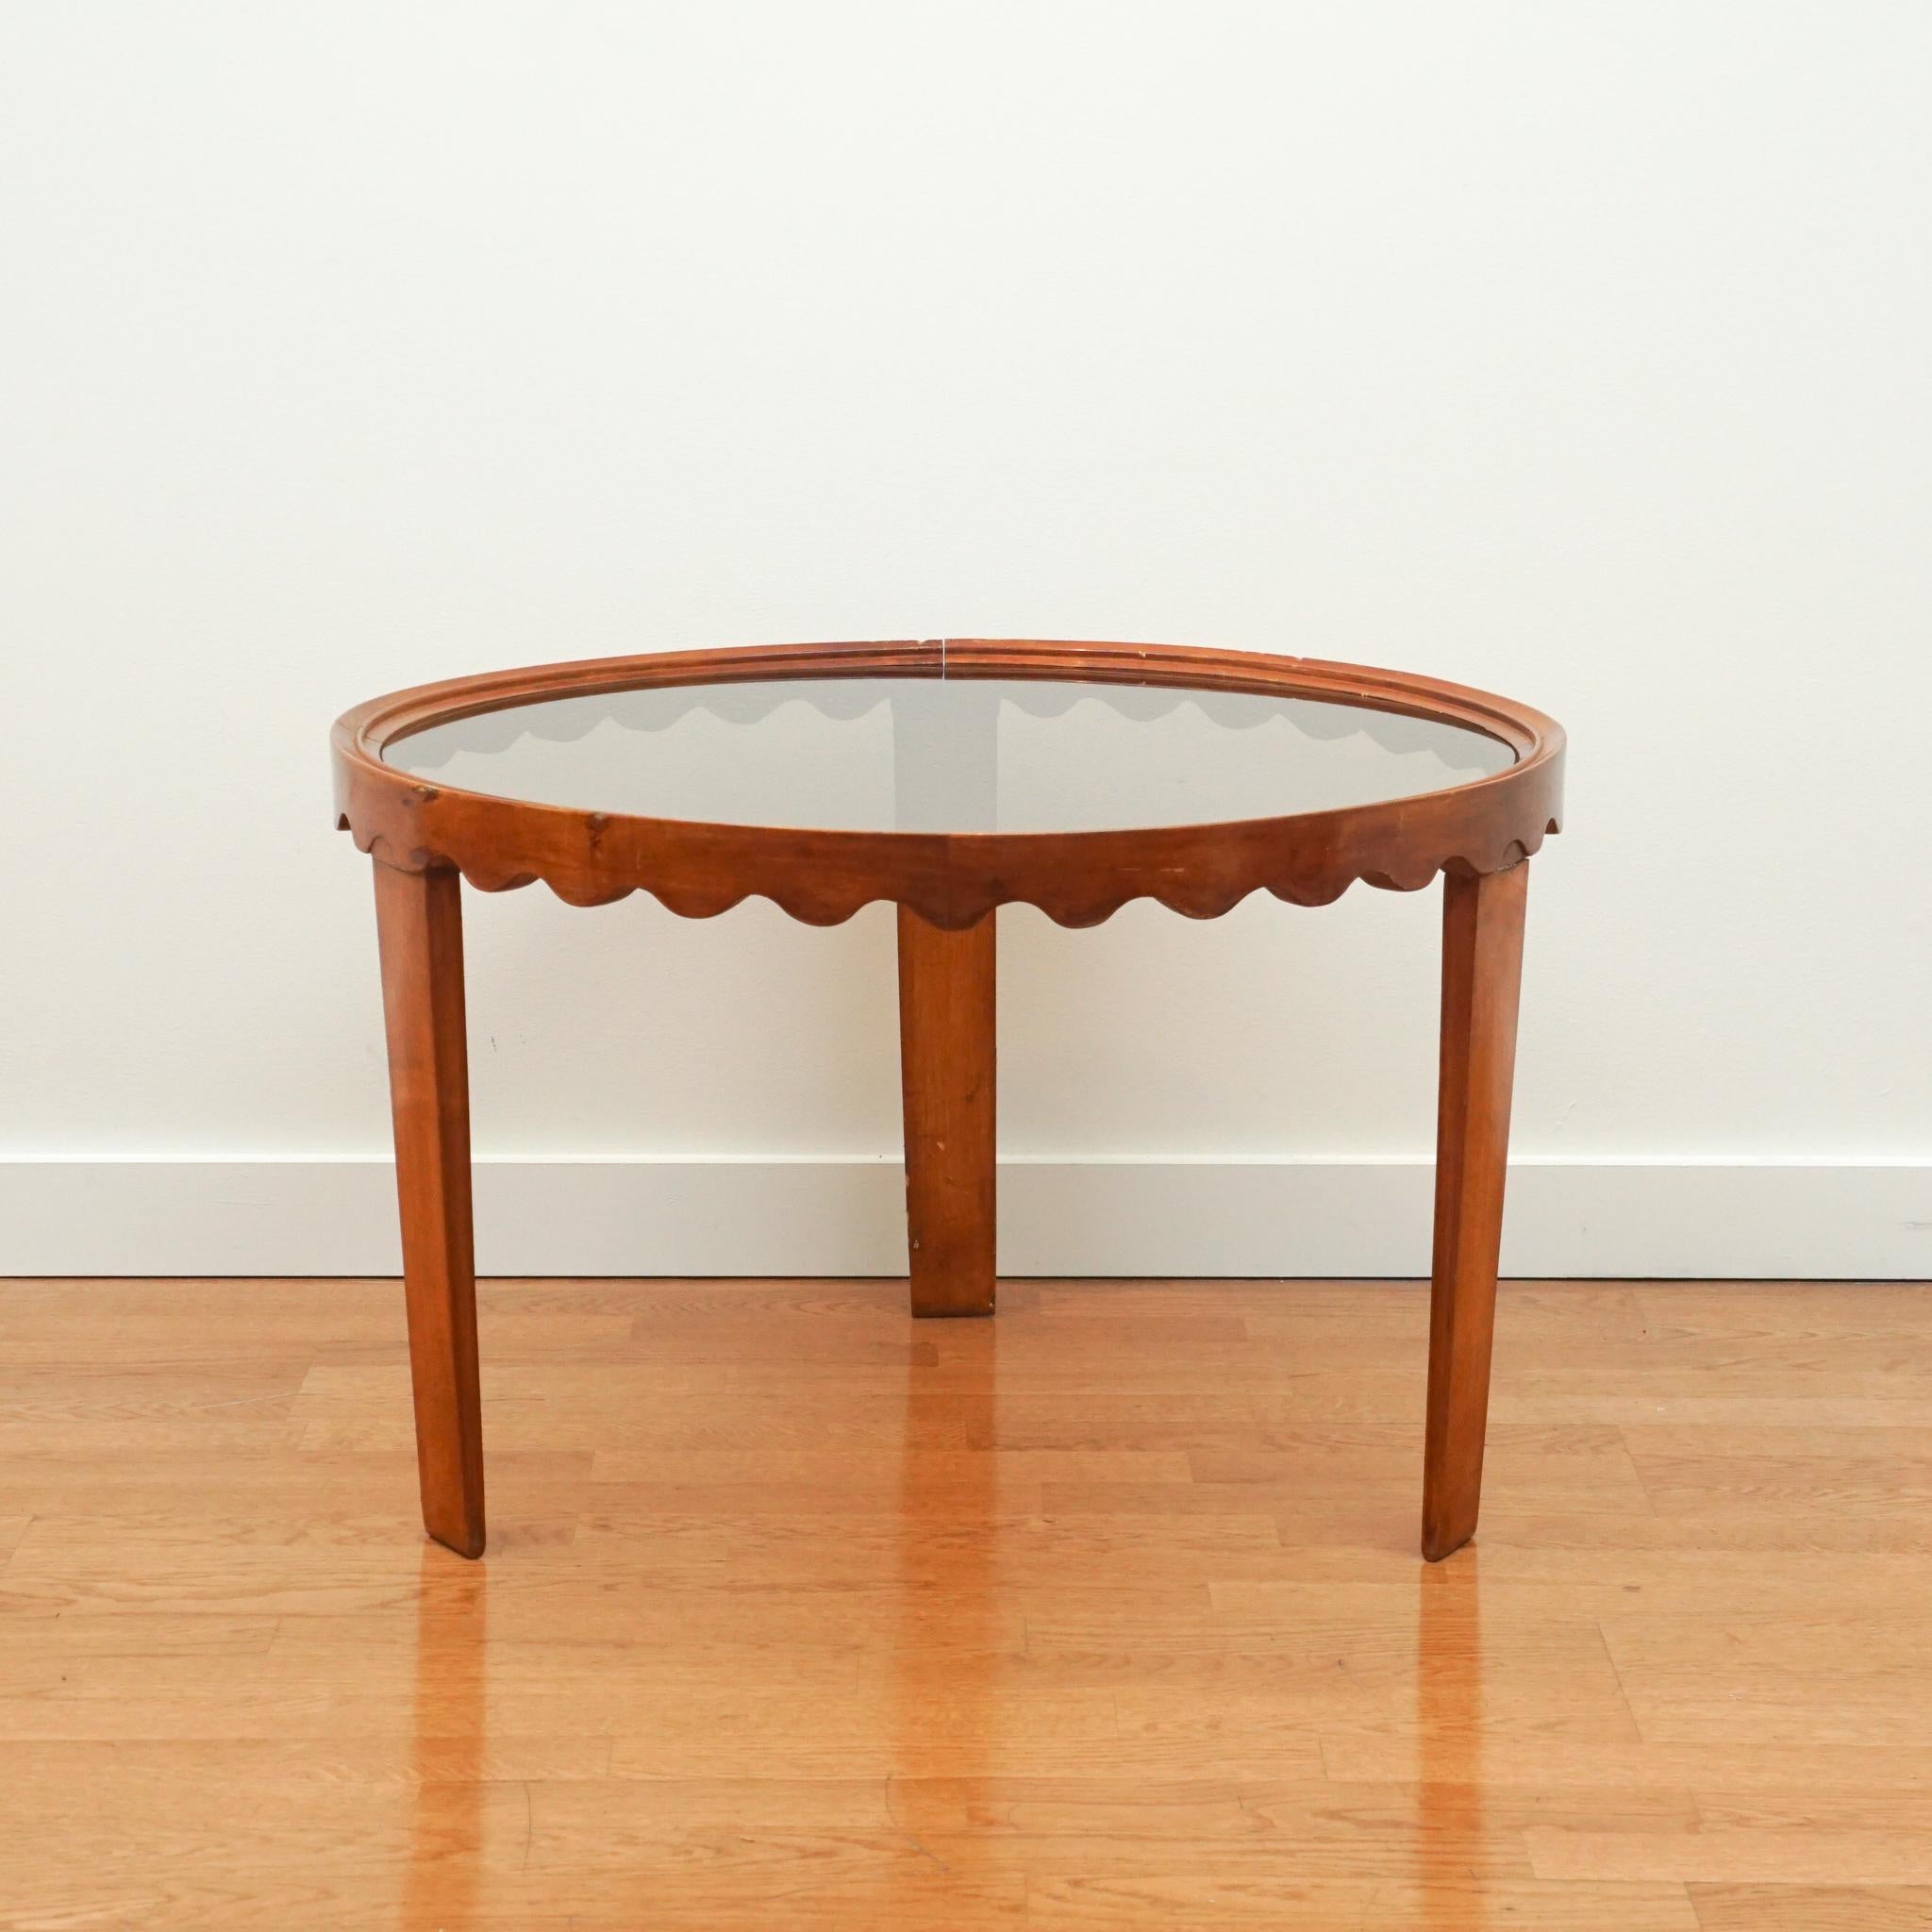 This exquisite accent table was designed by Paola Buffa in the 1940s. Featuring a scalloped apron design, three tapered square-cut legs and a smokey glass top, the table adds a sculptural elegance to any interior. Consider it for traditional spaces